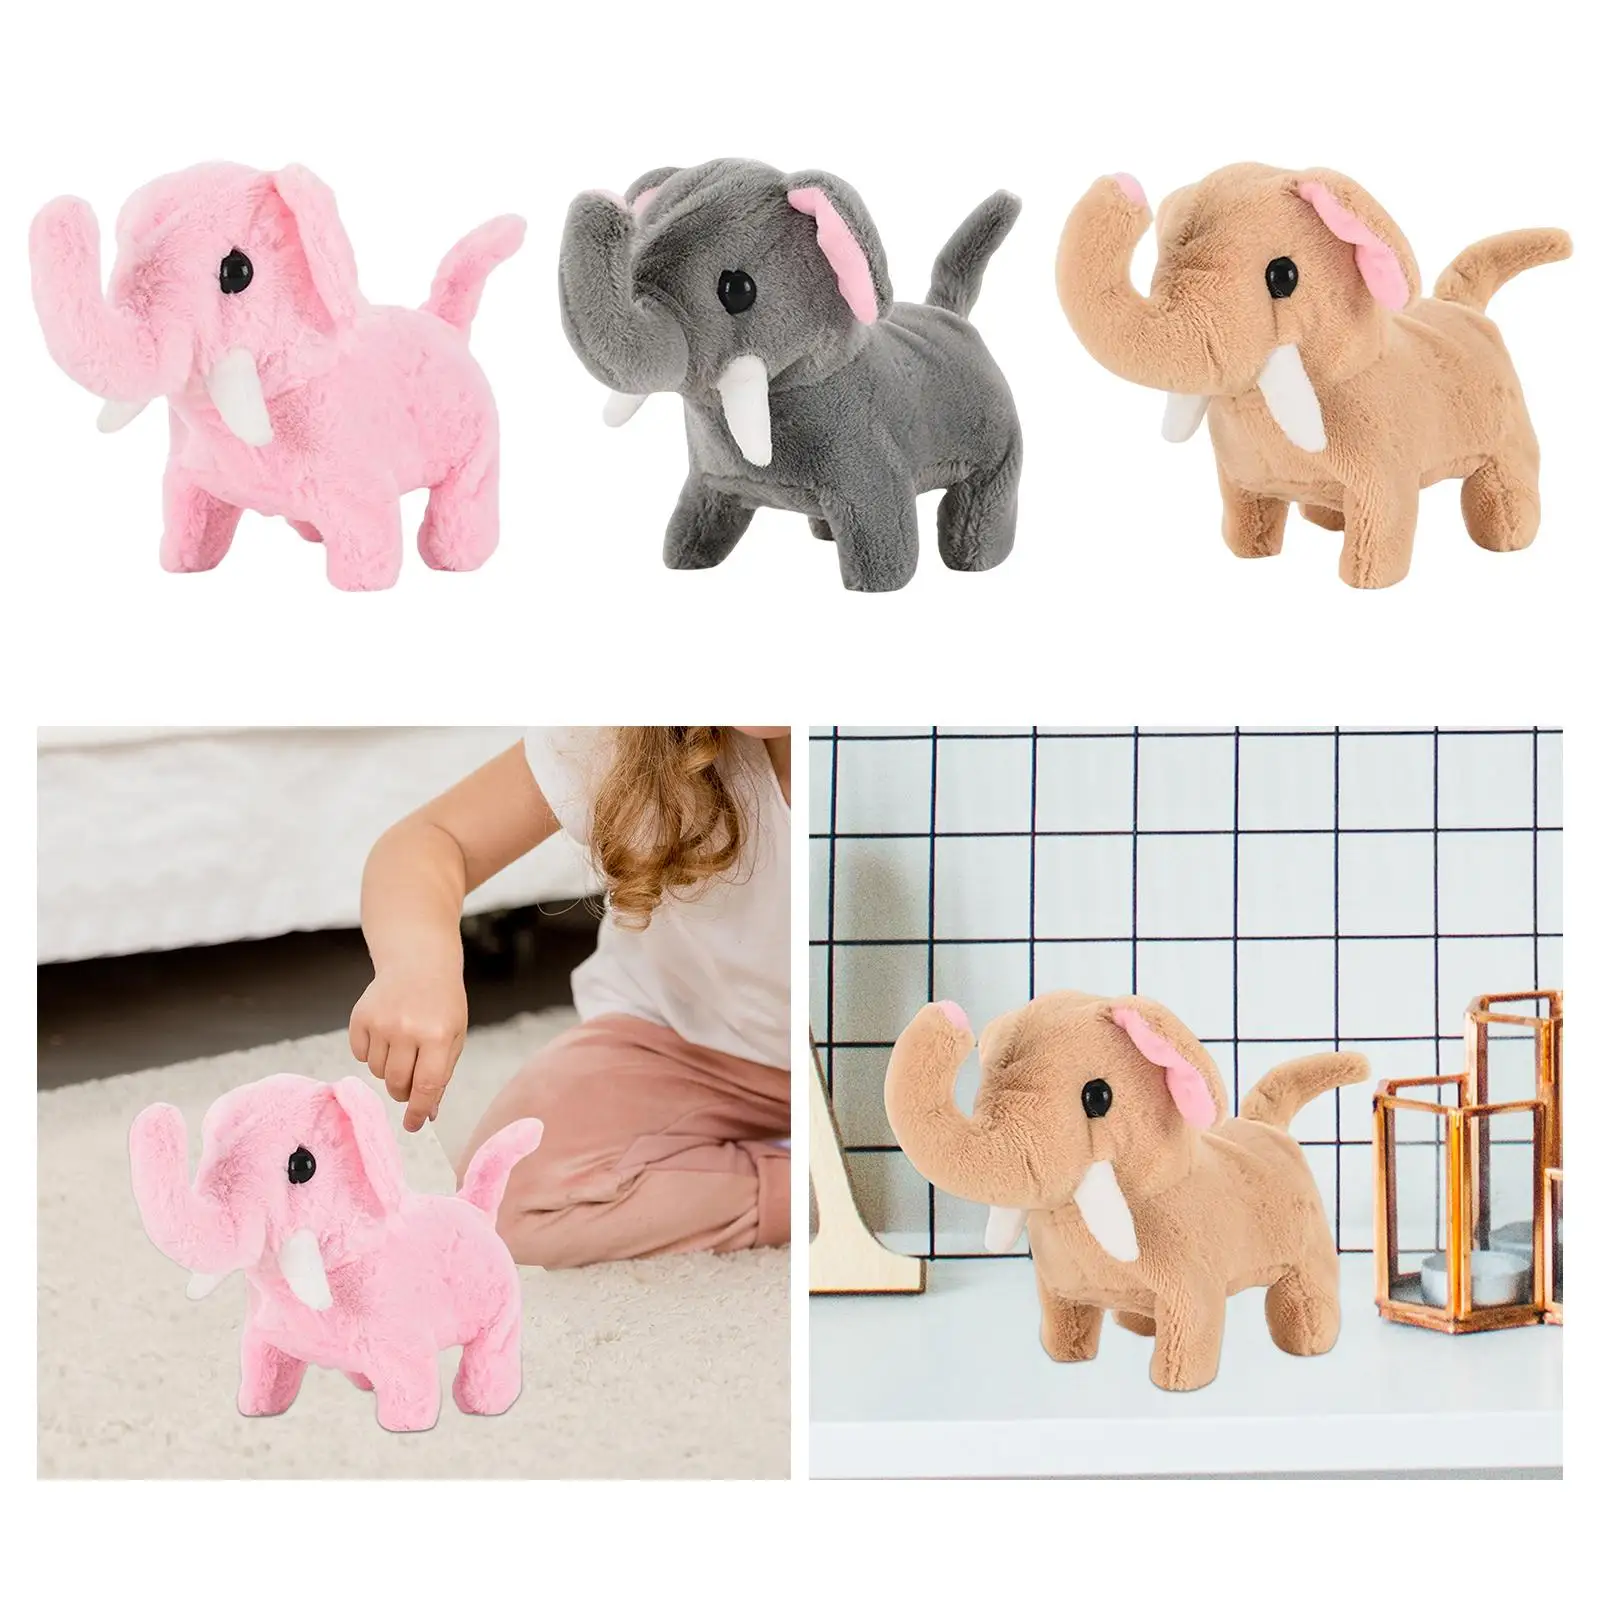 Simulation Plush Animal Baby Toy for Birthday Easter Holiday Gift